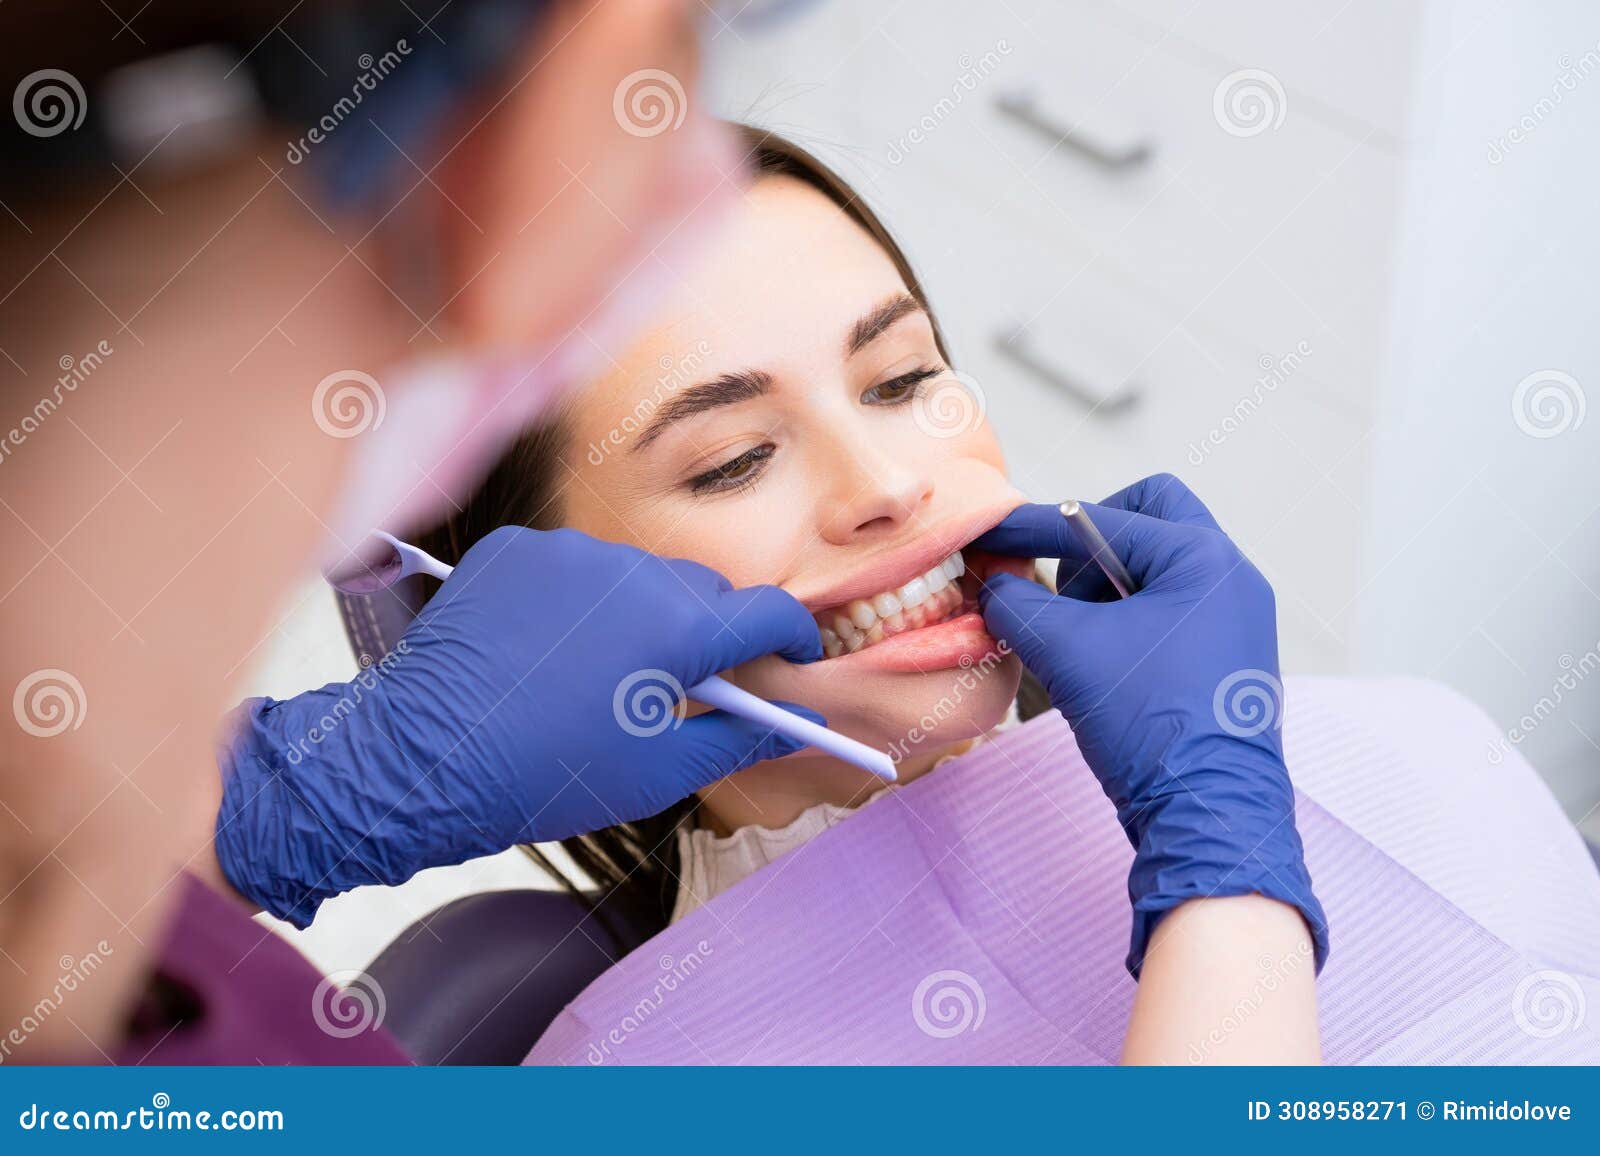 the dentist examines the patients bite at the dental office